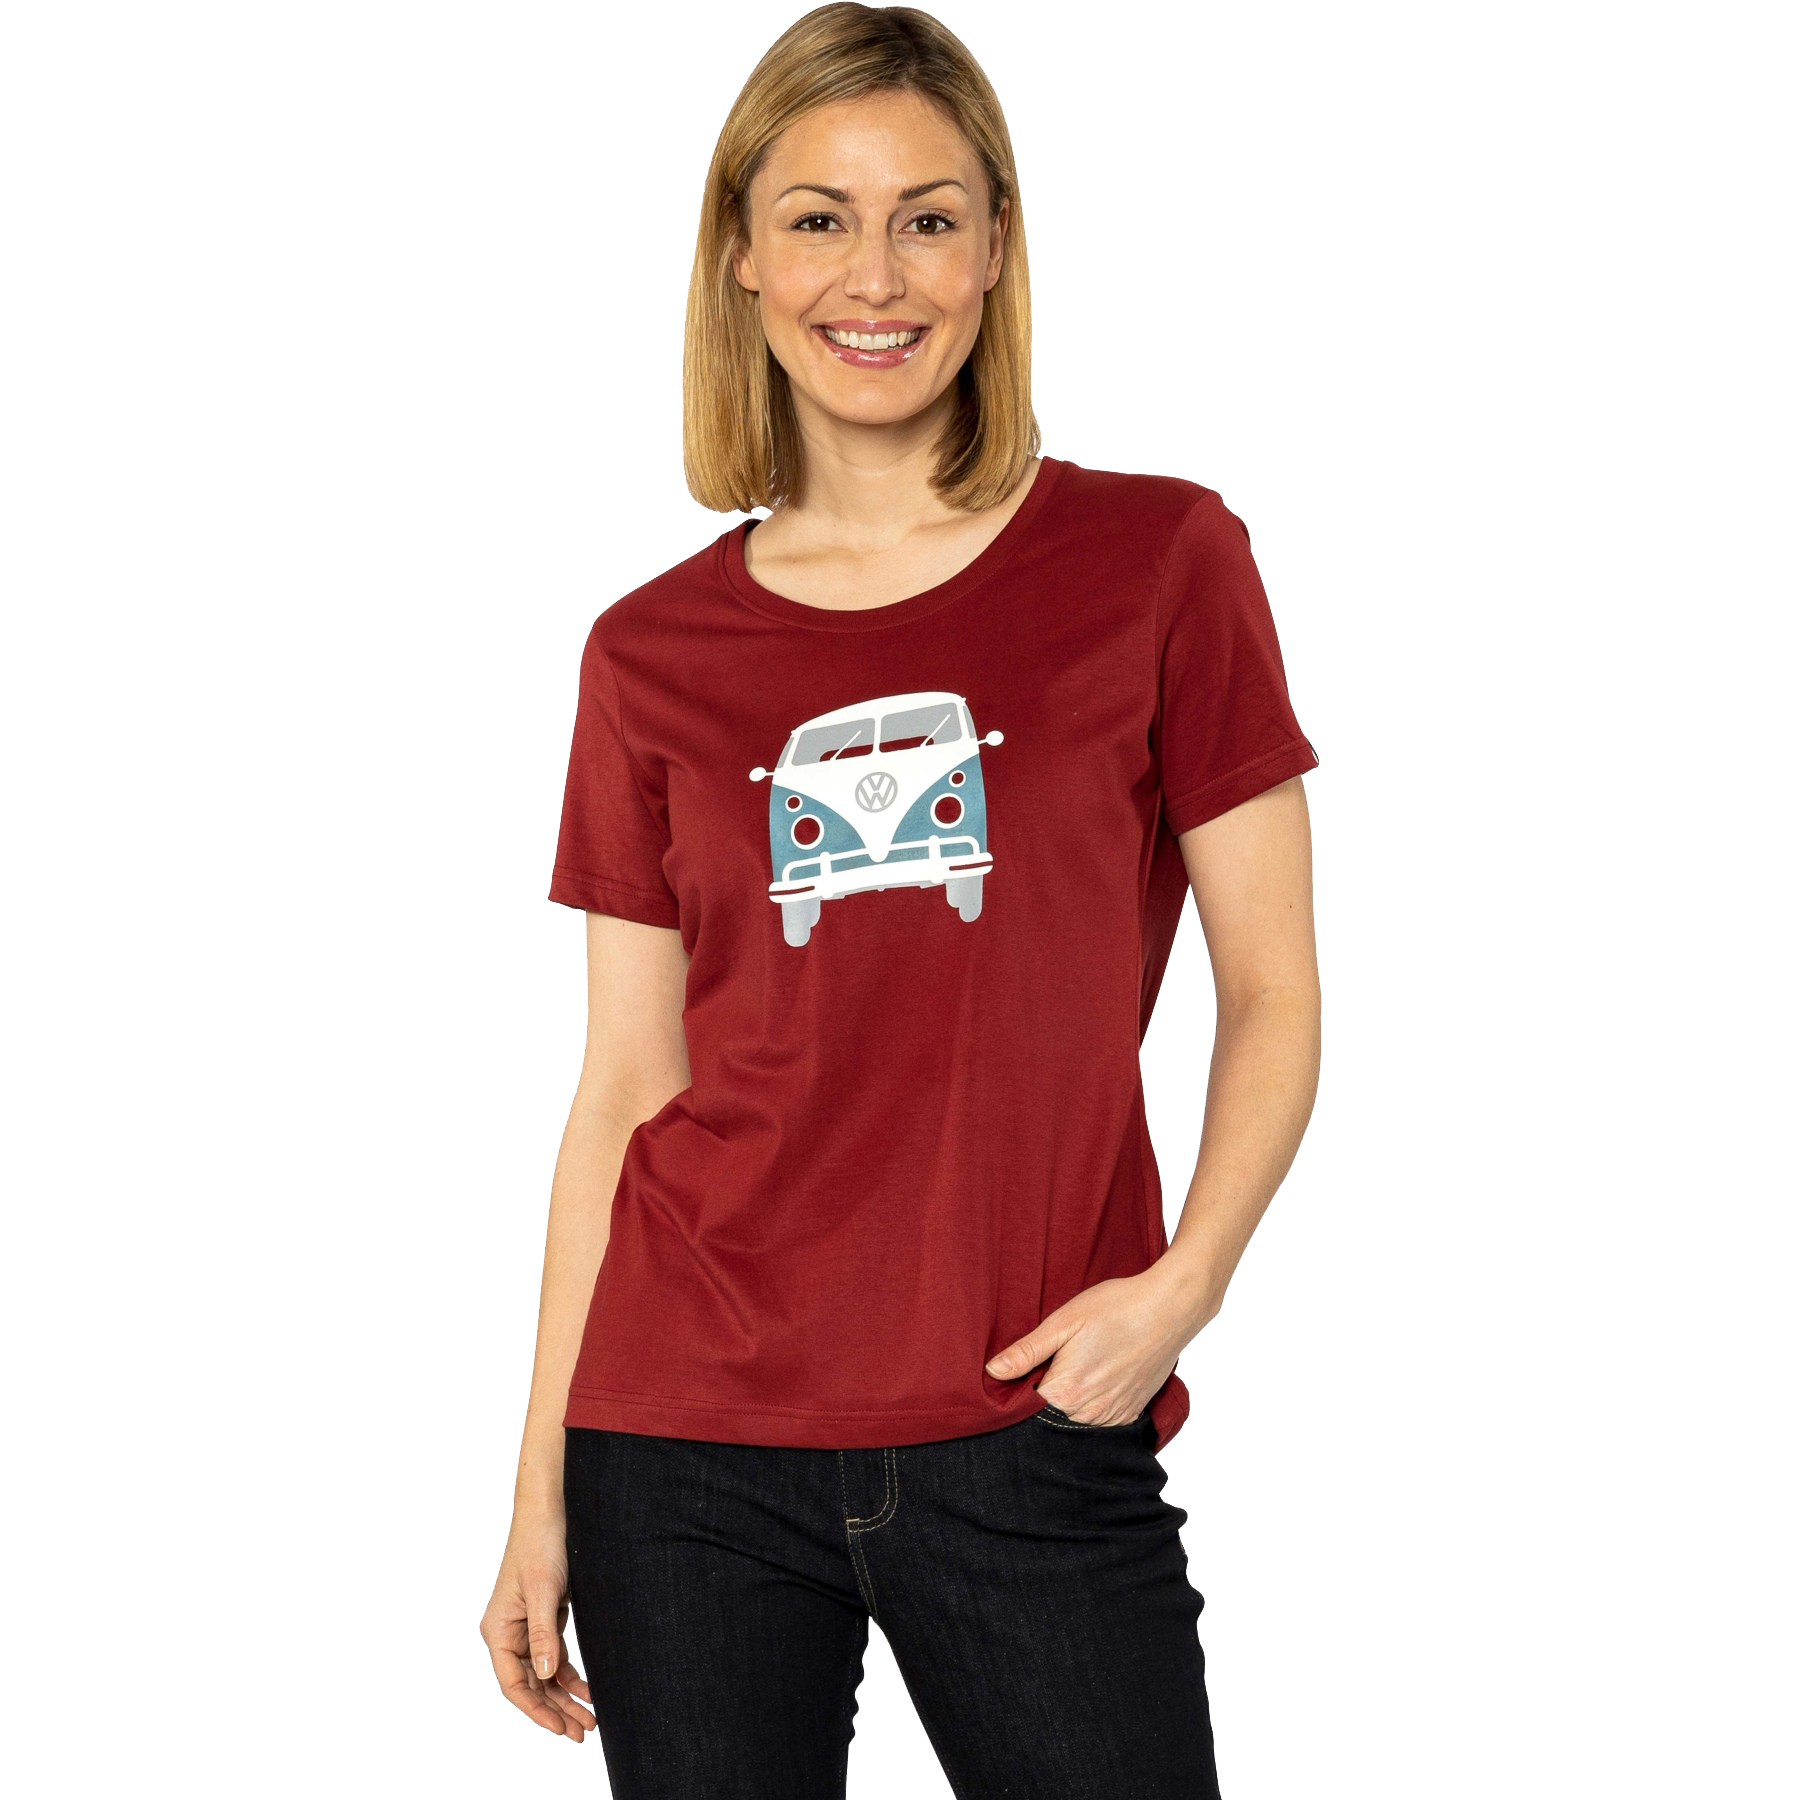 Picture of Elkline KULT T-Shirt Women - Licensed by VW - syrahred